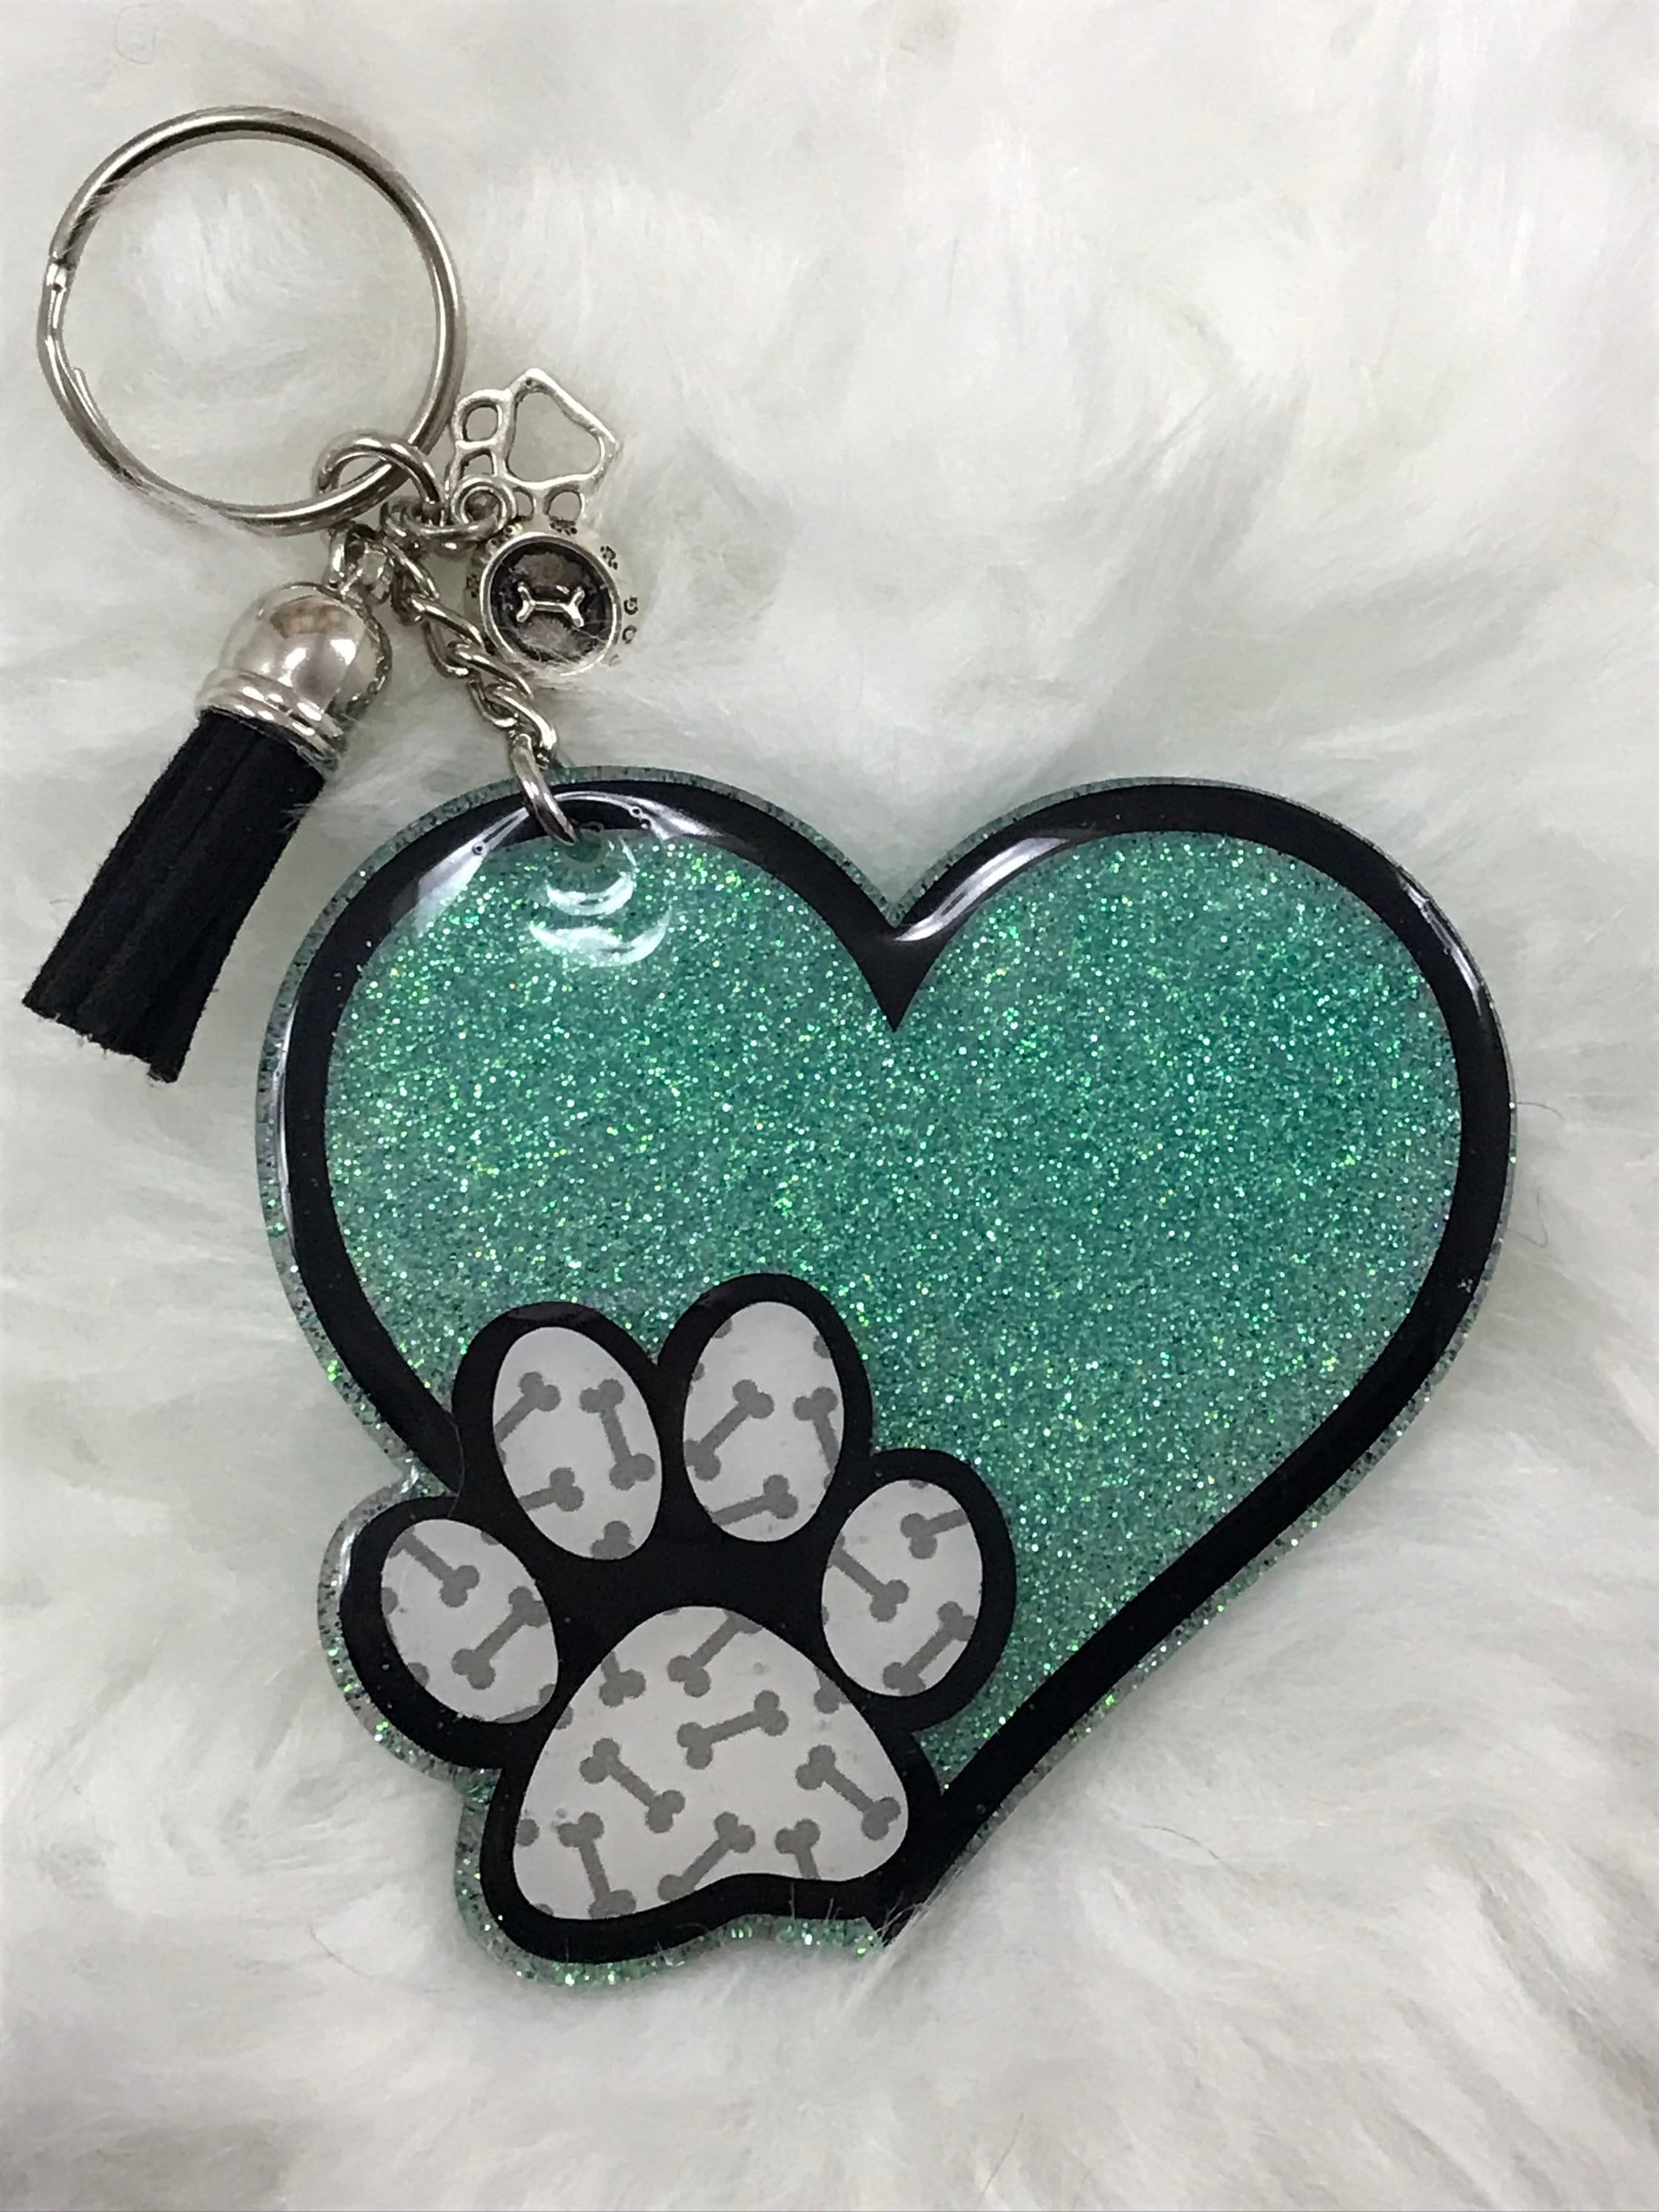 Paw Print with Heart Key Chain Black Color 